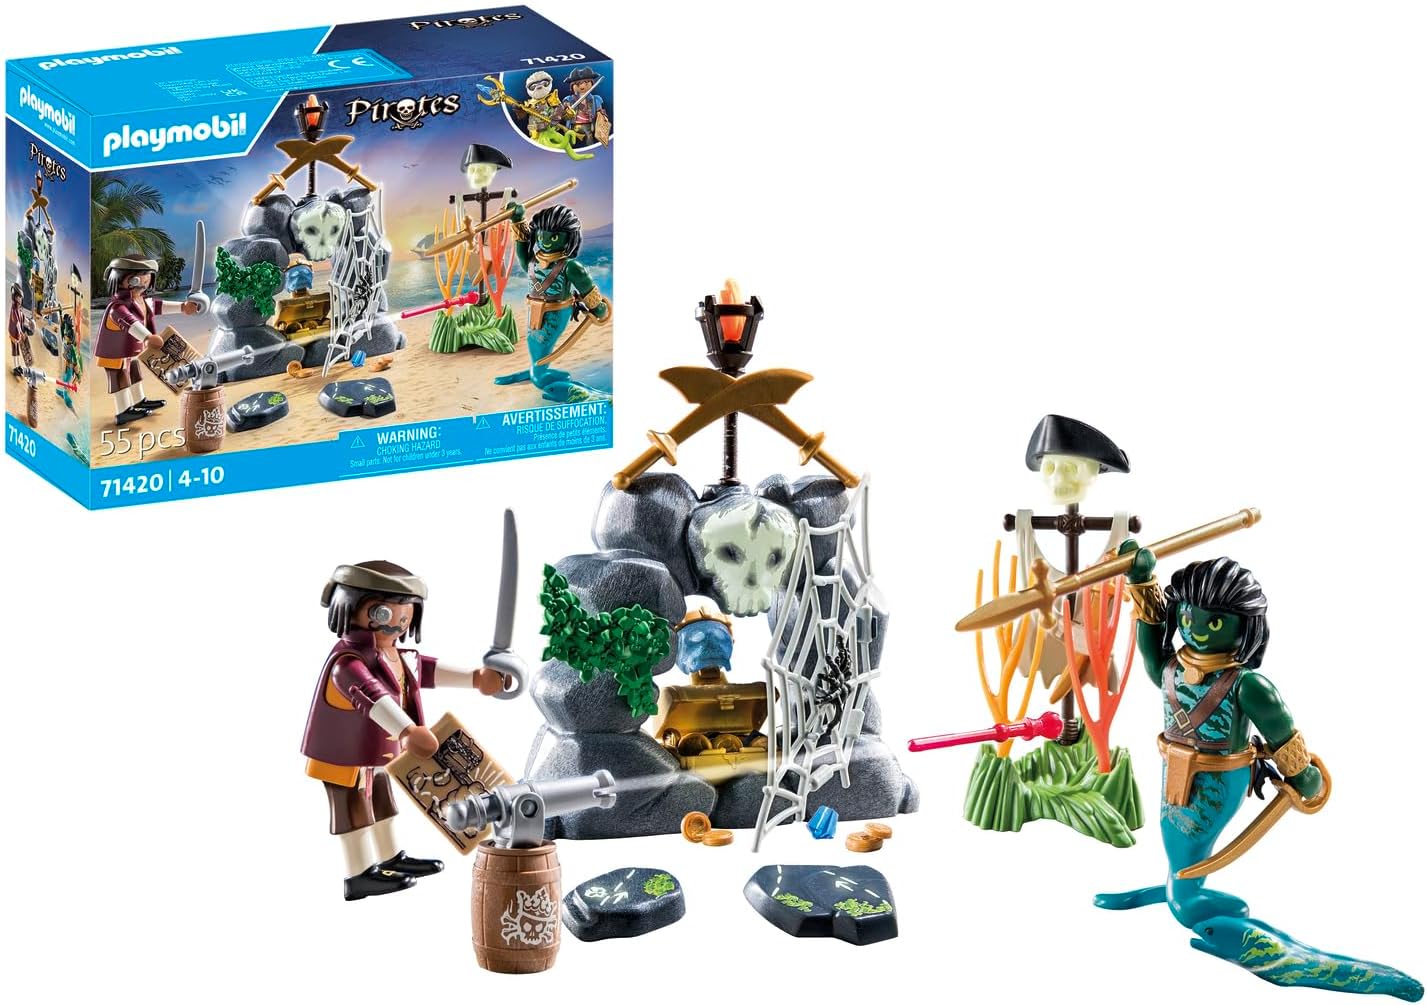 Playmobil Pirates 71420 Treasure Hunt, Looking for the Crystal Skull, Exciting Underwater World with Pirate and Moray Eel Man, Toy for Children from 4 Years